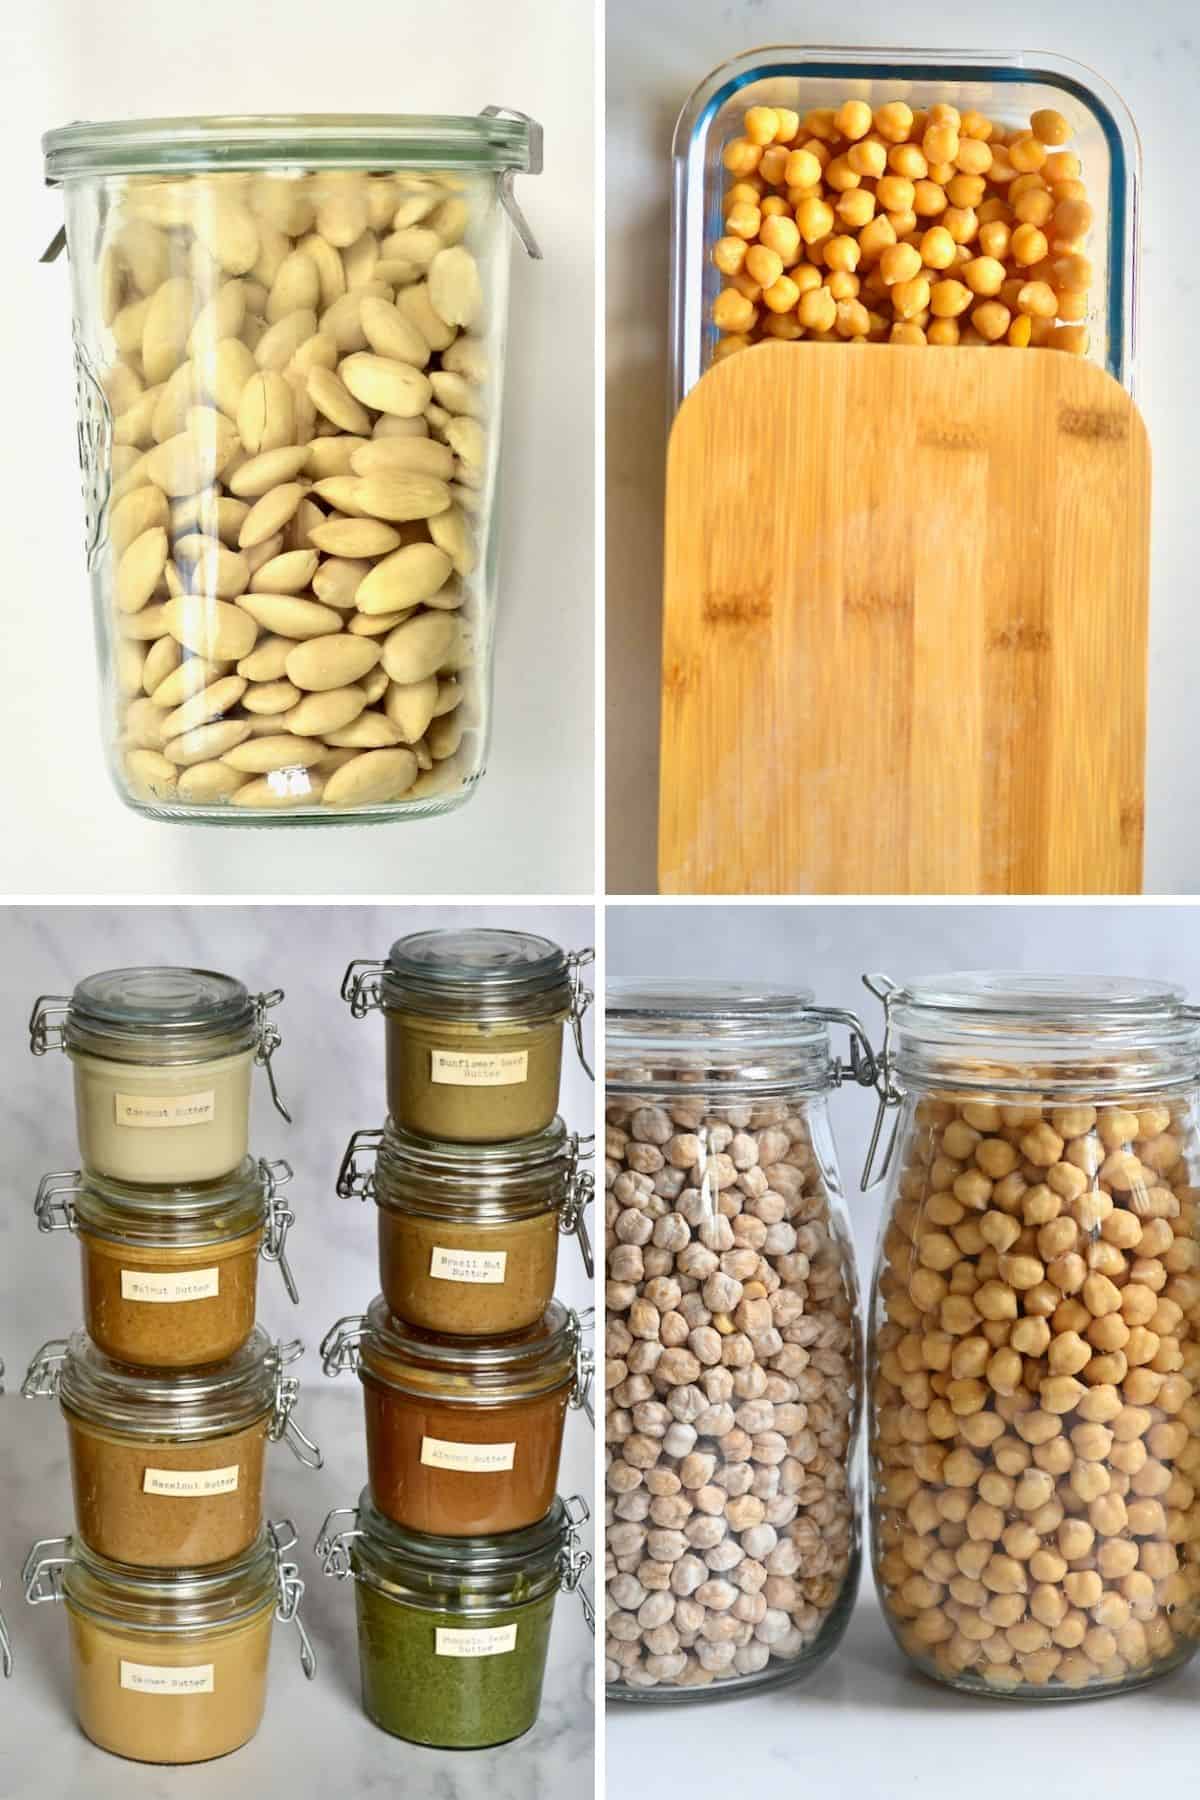 https://www.alphafoodie.com/wp-content/uploads/2022/03/Meal-Prep-for-Beginners-Containers-and-jars.jpeg